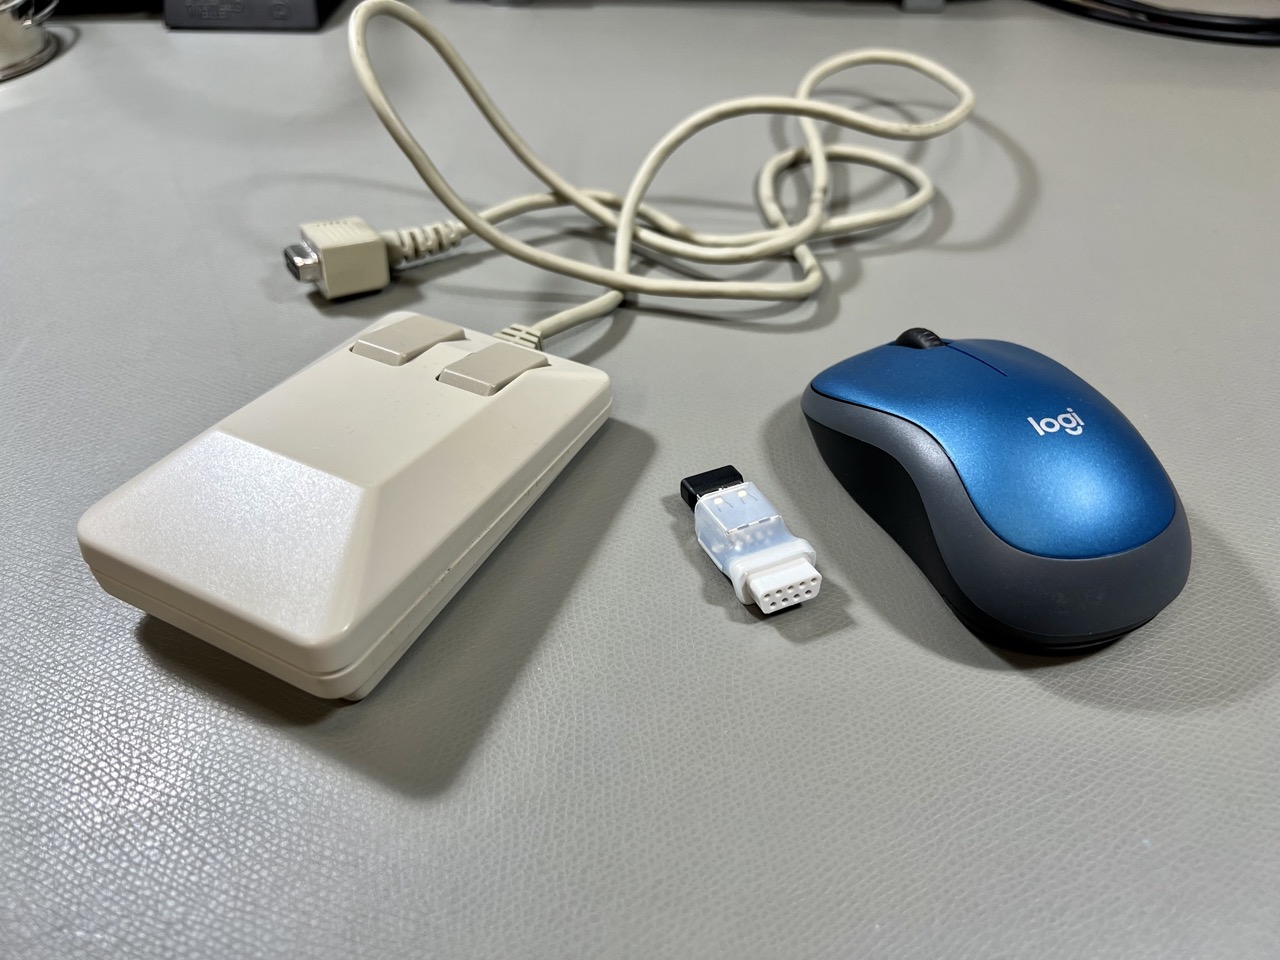 A vintage Commodore 1351 mouse, and a mouSTer USB mouse converter with a modern wireless Logitech M185.